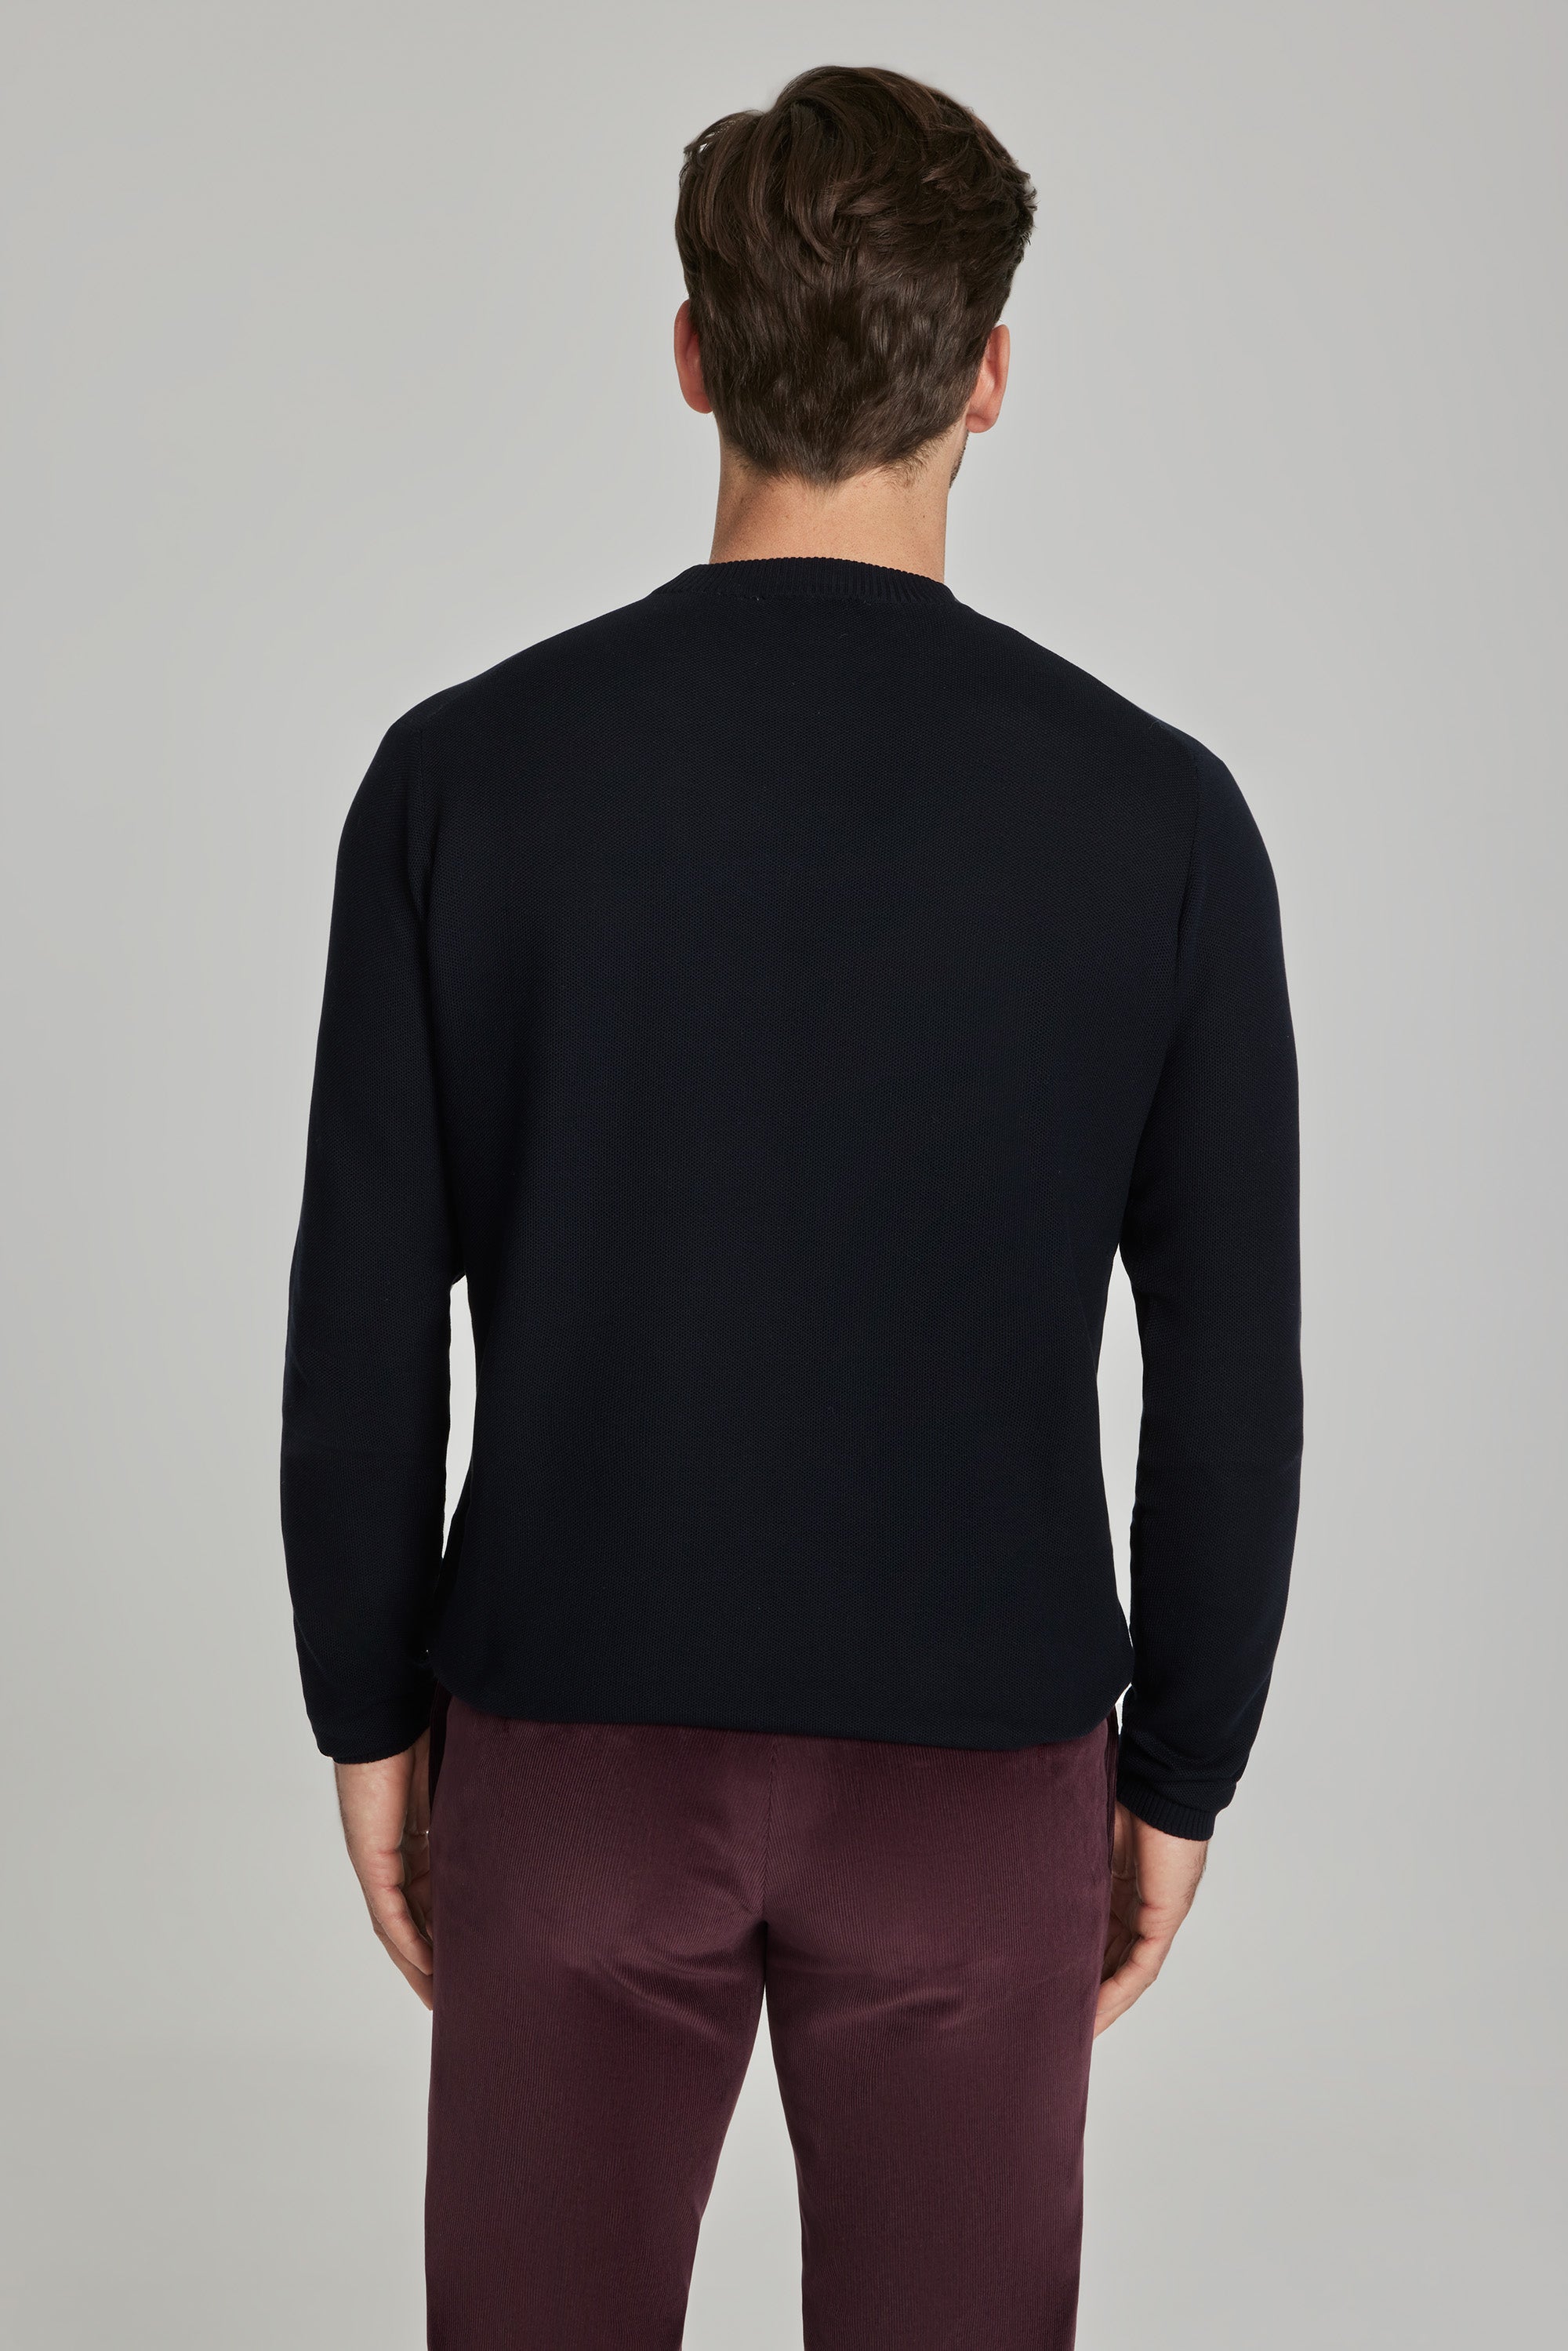 Jack Victor Men's Beaudry Charcoal Wool, Silk and Cashmere Mock Neck Sweater